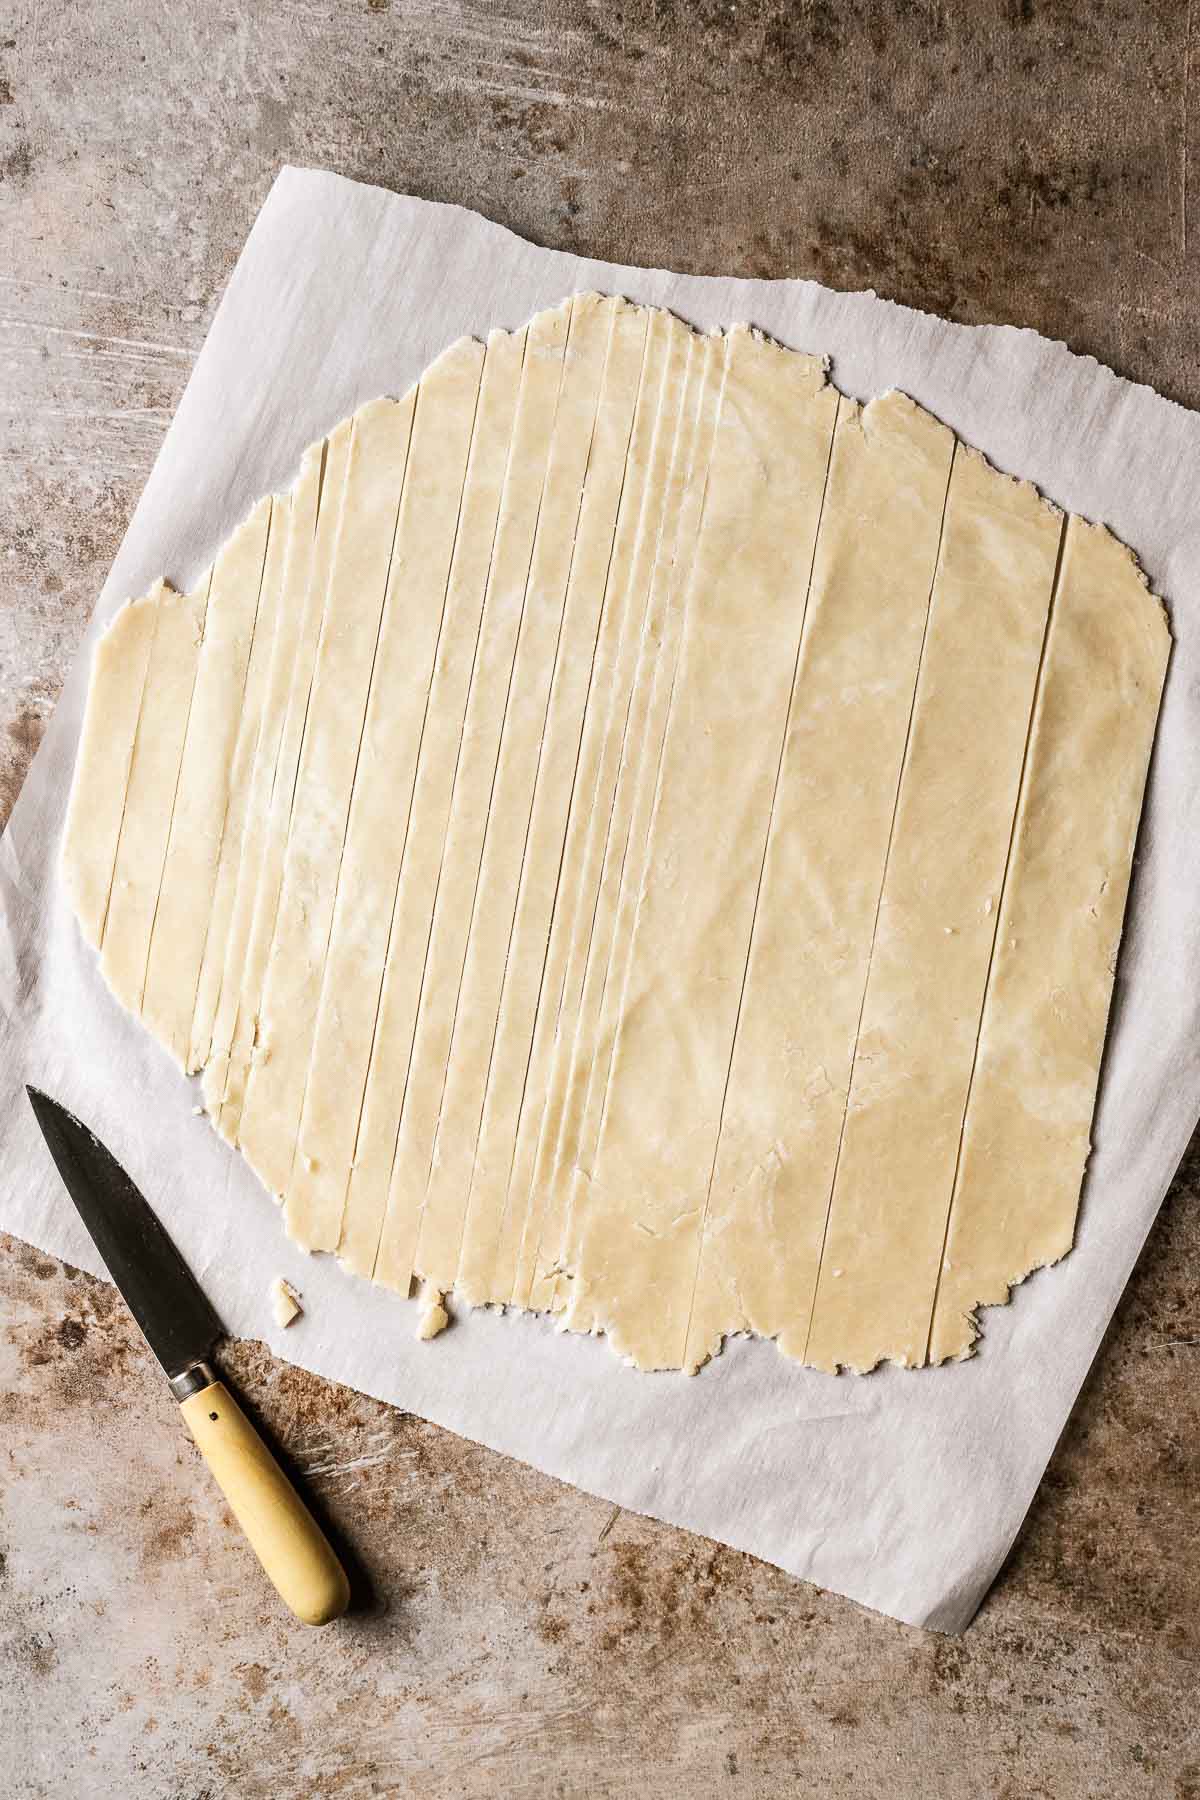 A rolled out sheet of pie dough on white parchment paper. The dough has random widths of lattice cut out and a knife rests nearby.